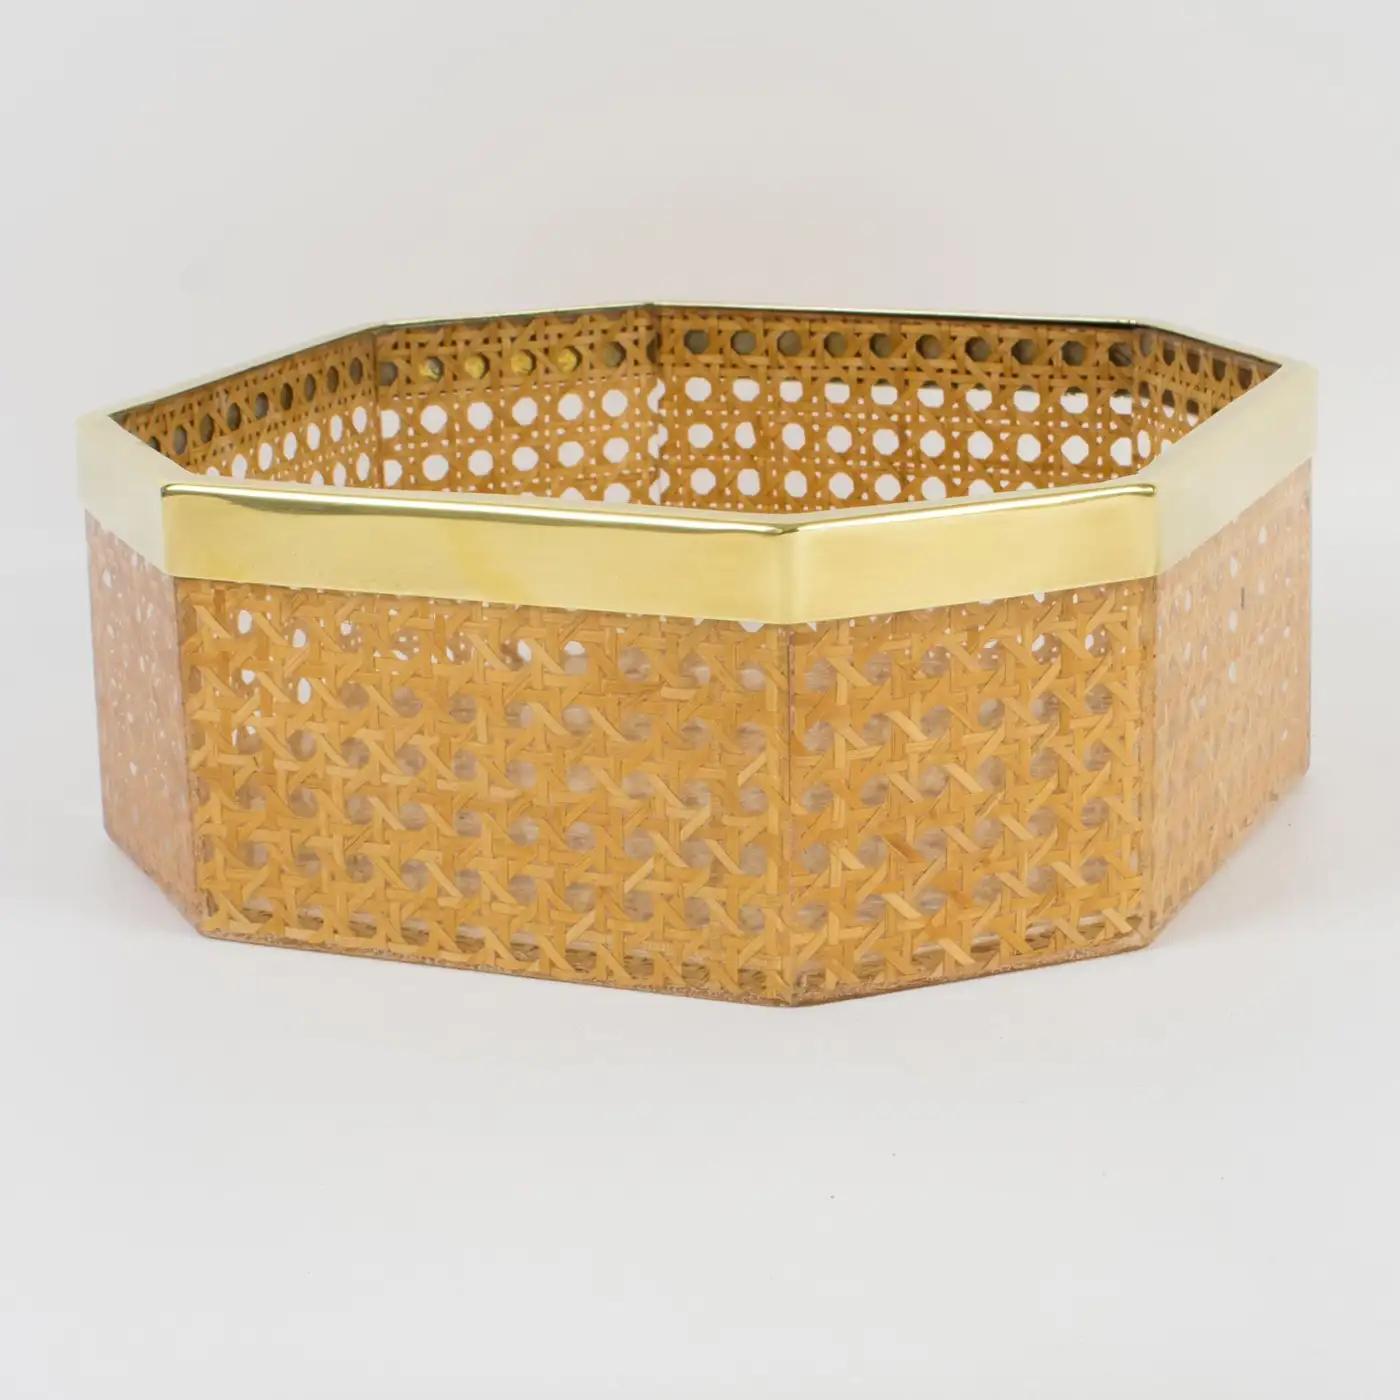 Christian Dior Home Lucite and Rattan Basket Bowl Centerpiece, 1970s In Excellent Condition For Sale In Atlanta, GA